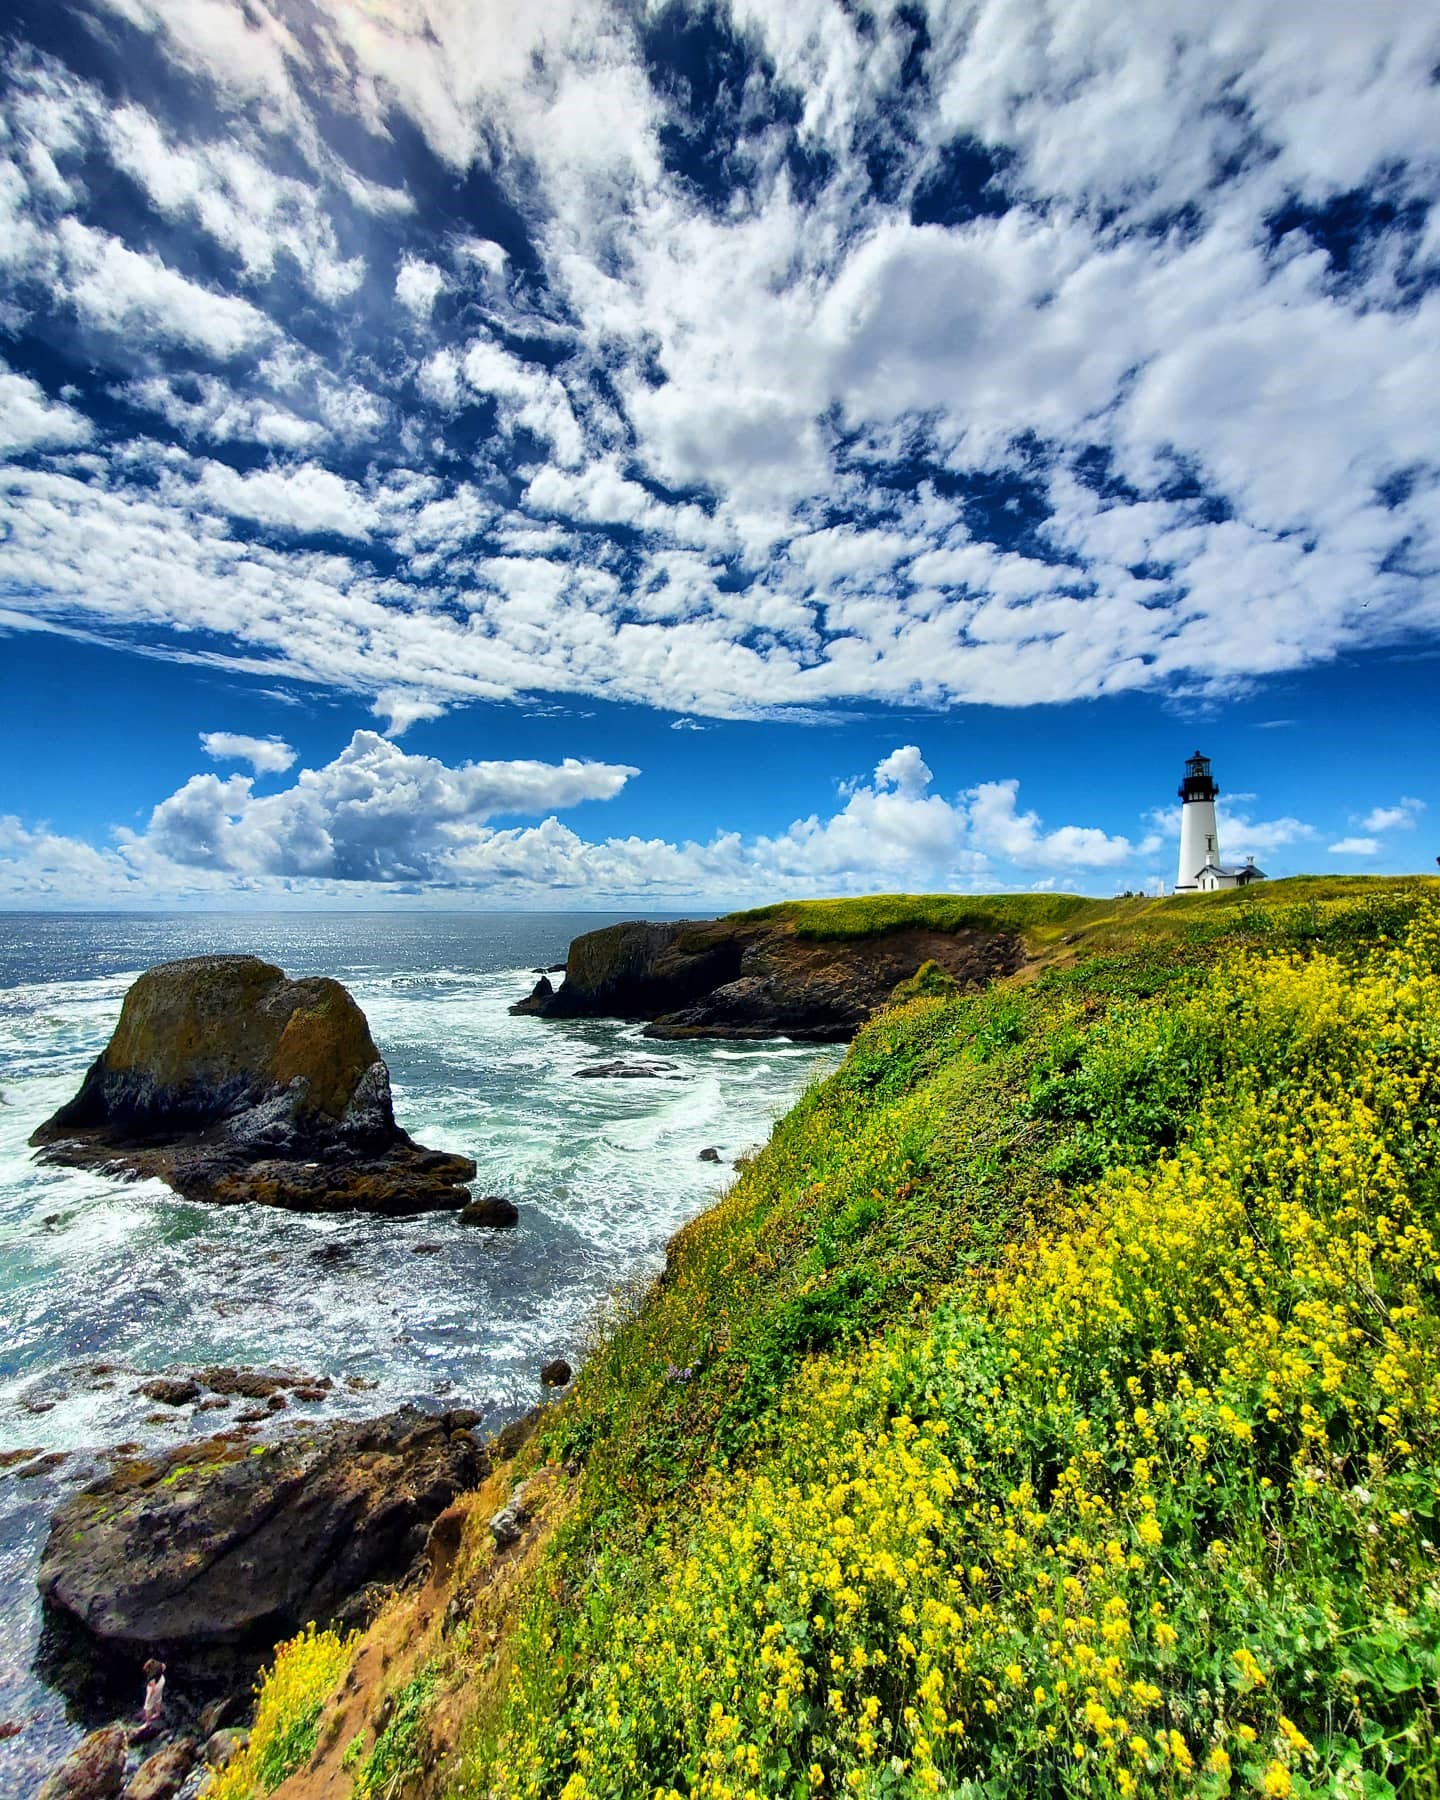 yaquina-head-outstanding-natural-area-in-oregon-photo-by-alyssa-uhen.jpg